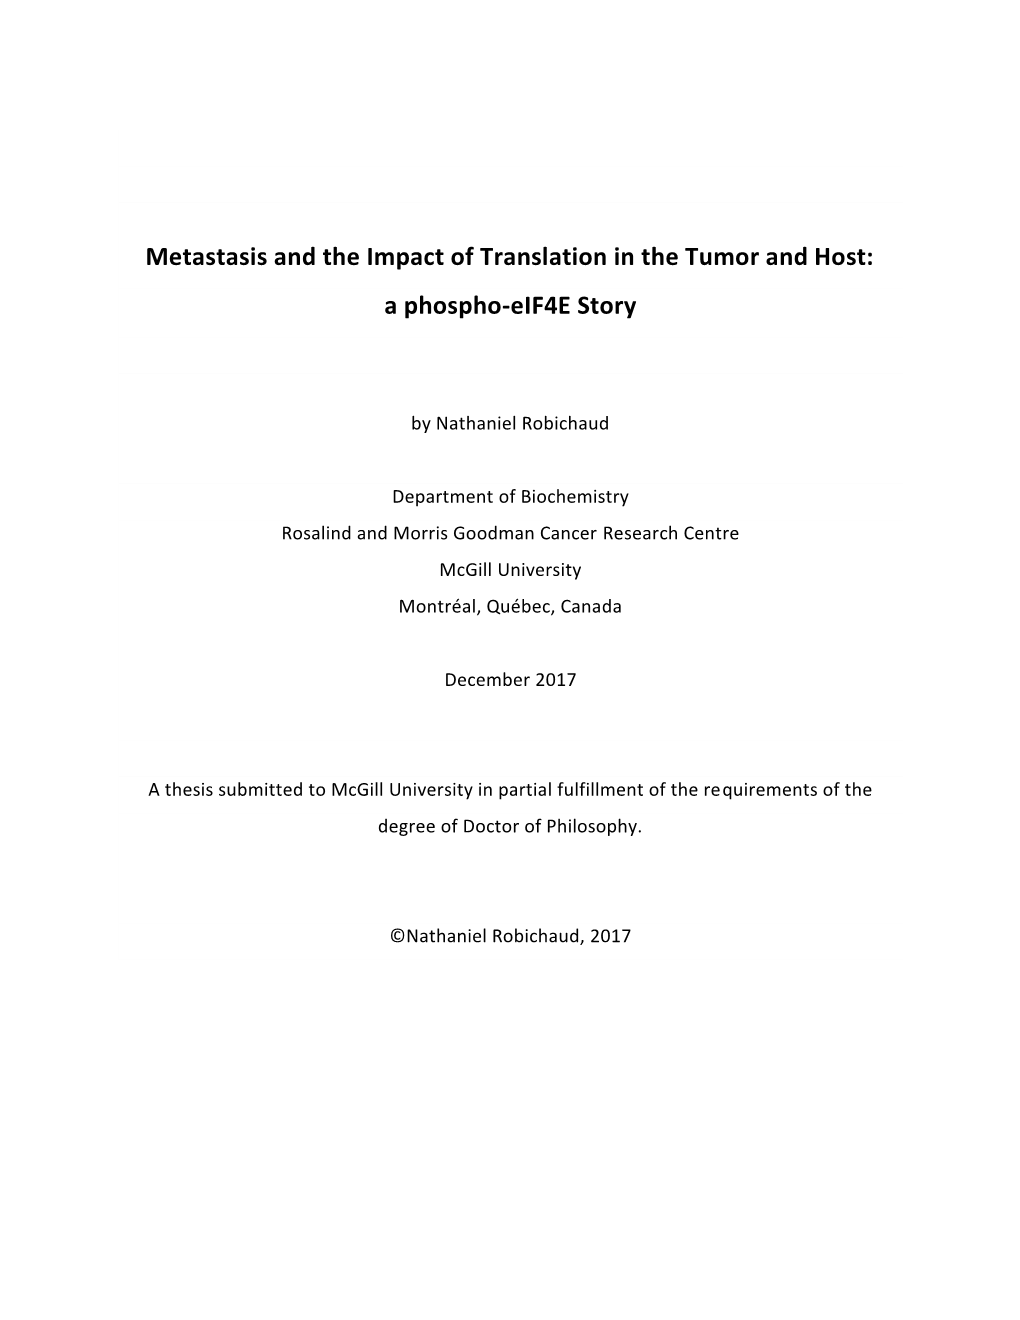 Metastasis and the Impact of Translation in the Tumor and Host: a Phospho-Eif4e Story